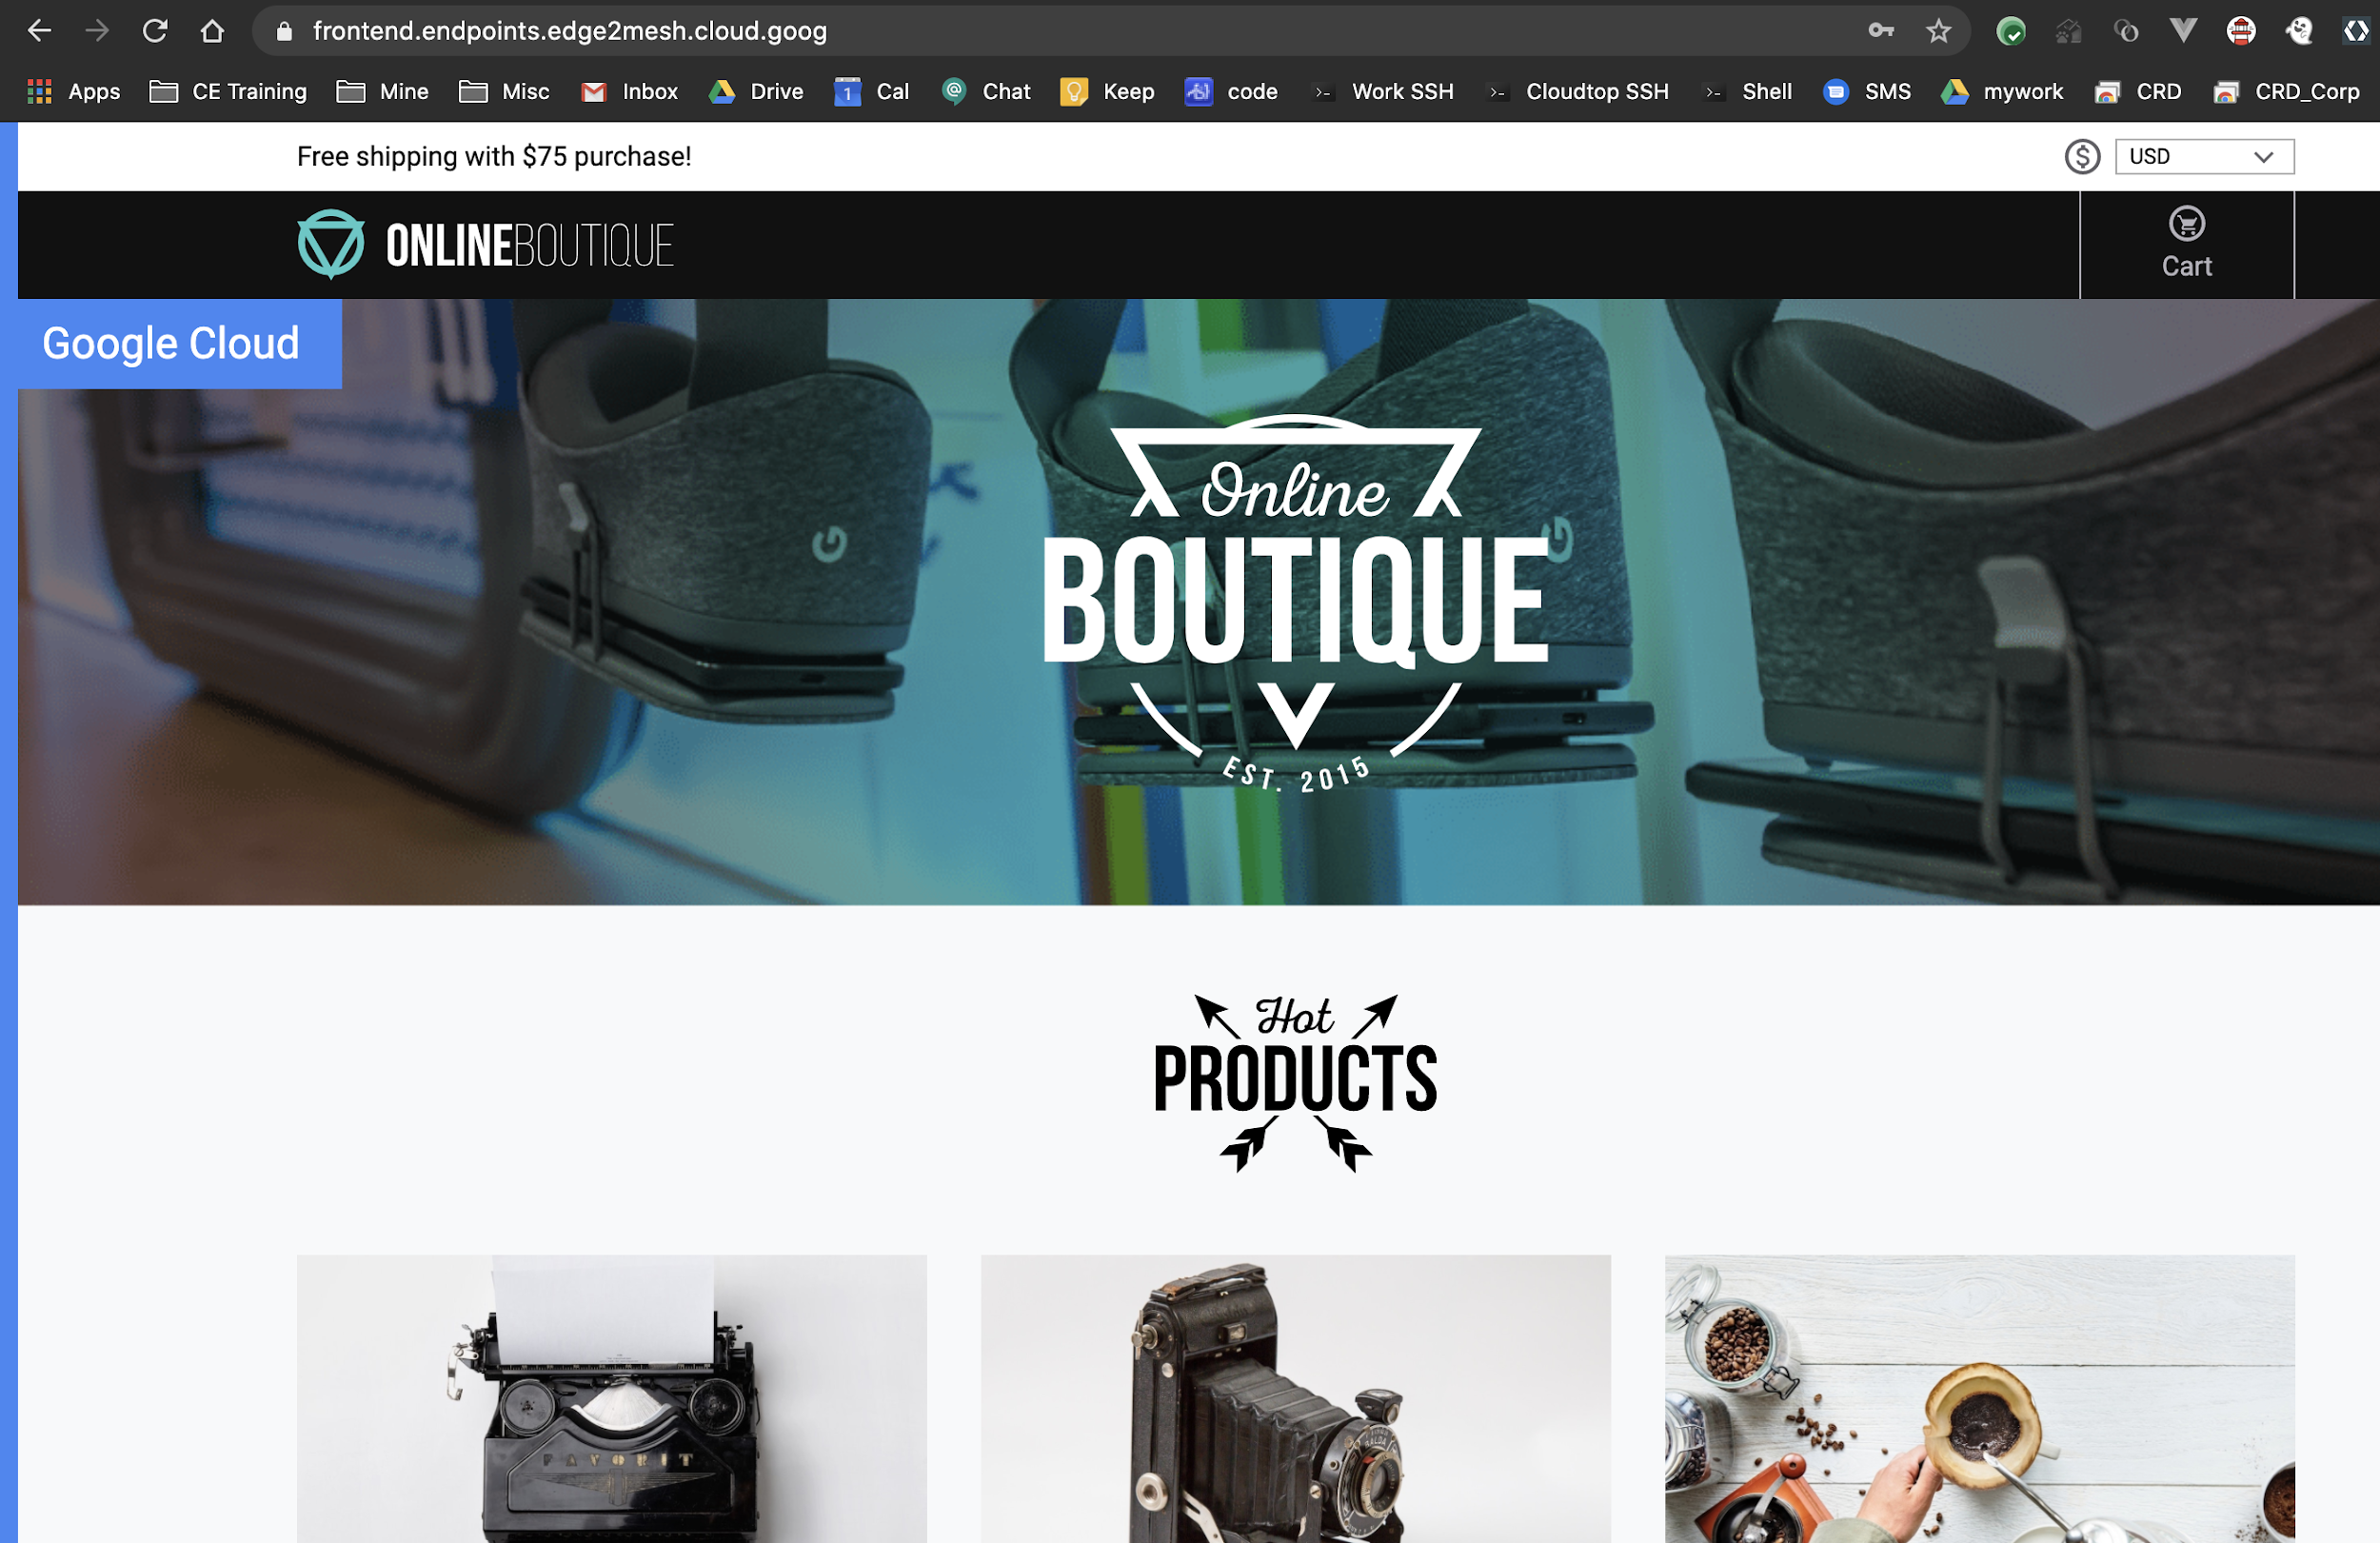 Products shown on Online Boutique home page.